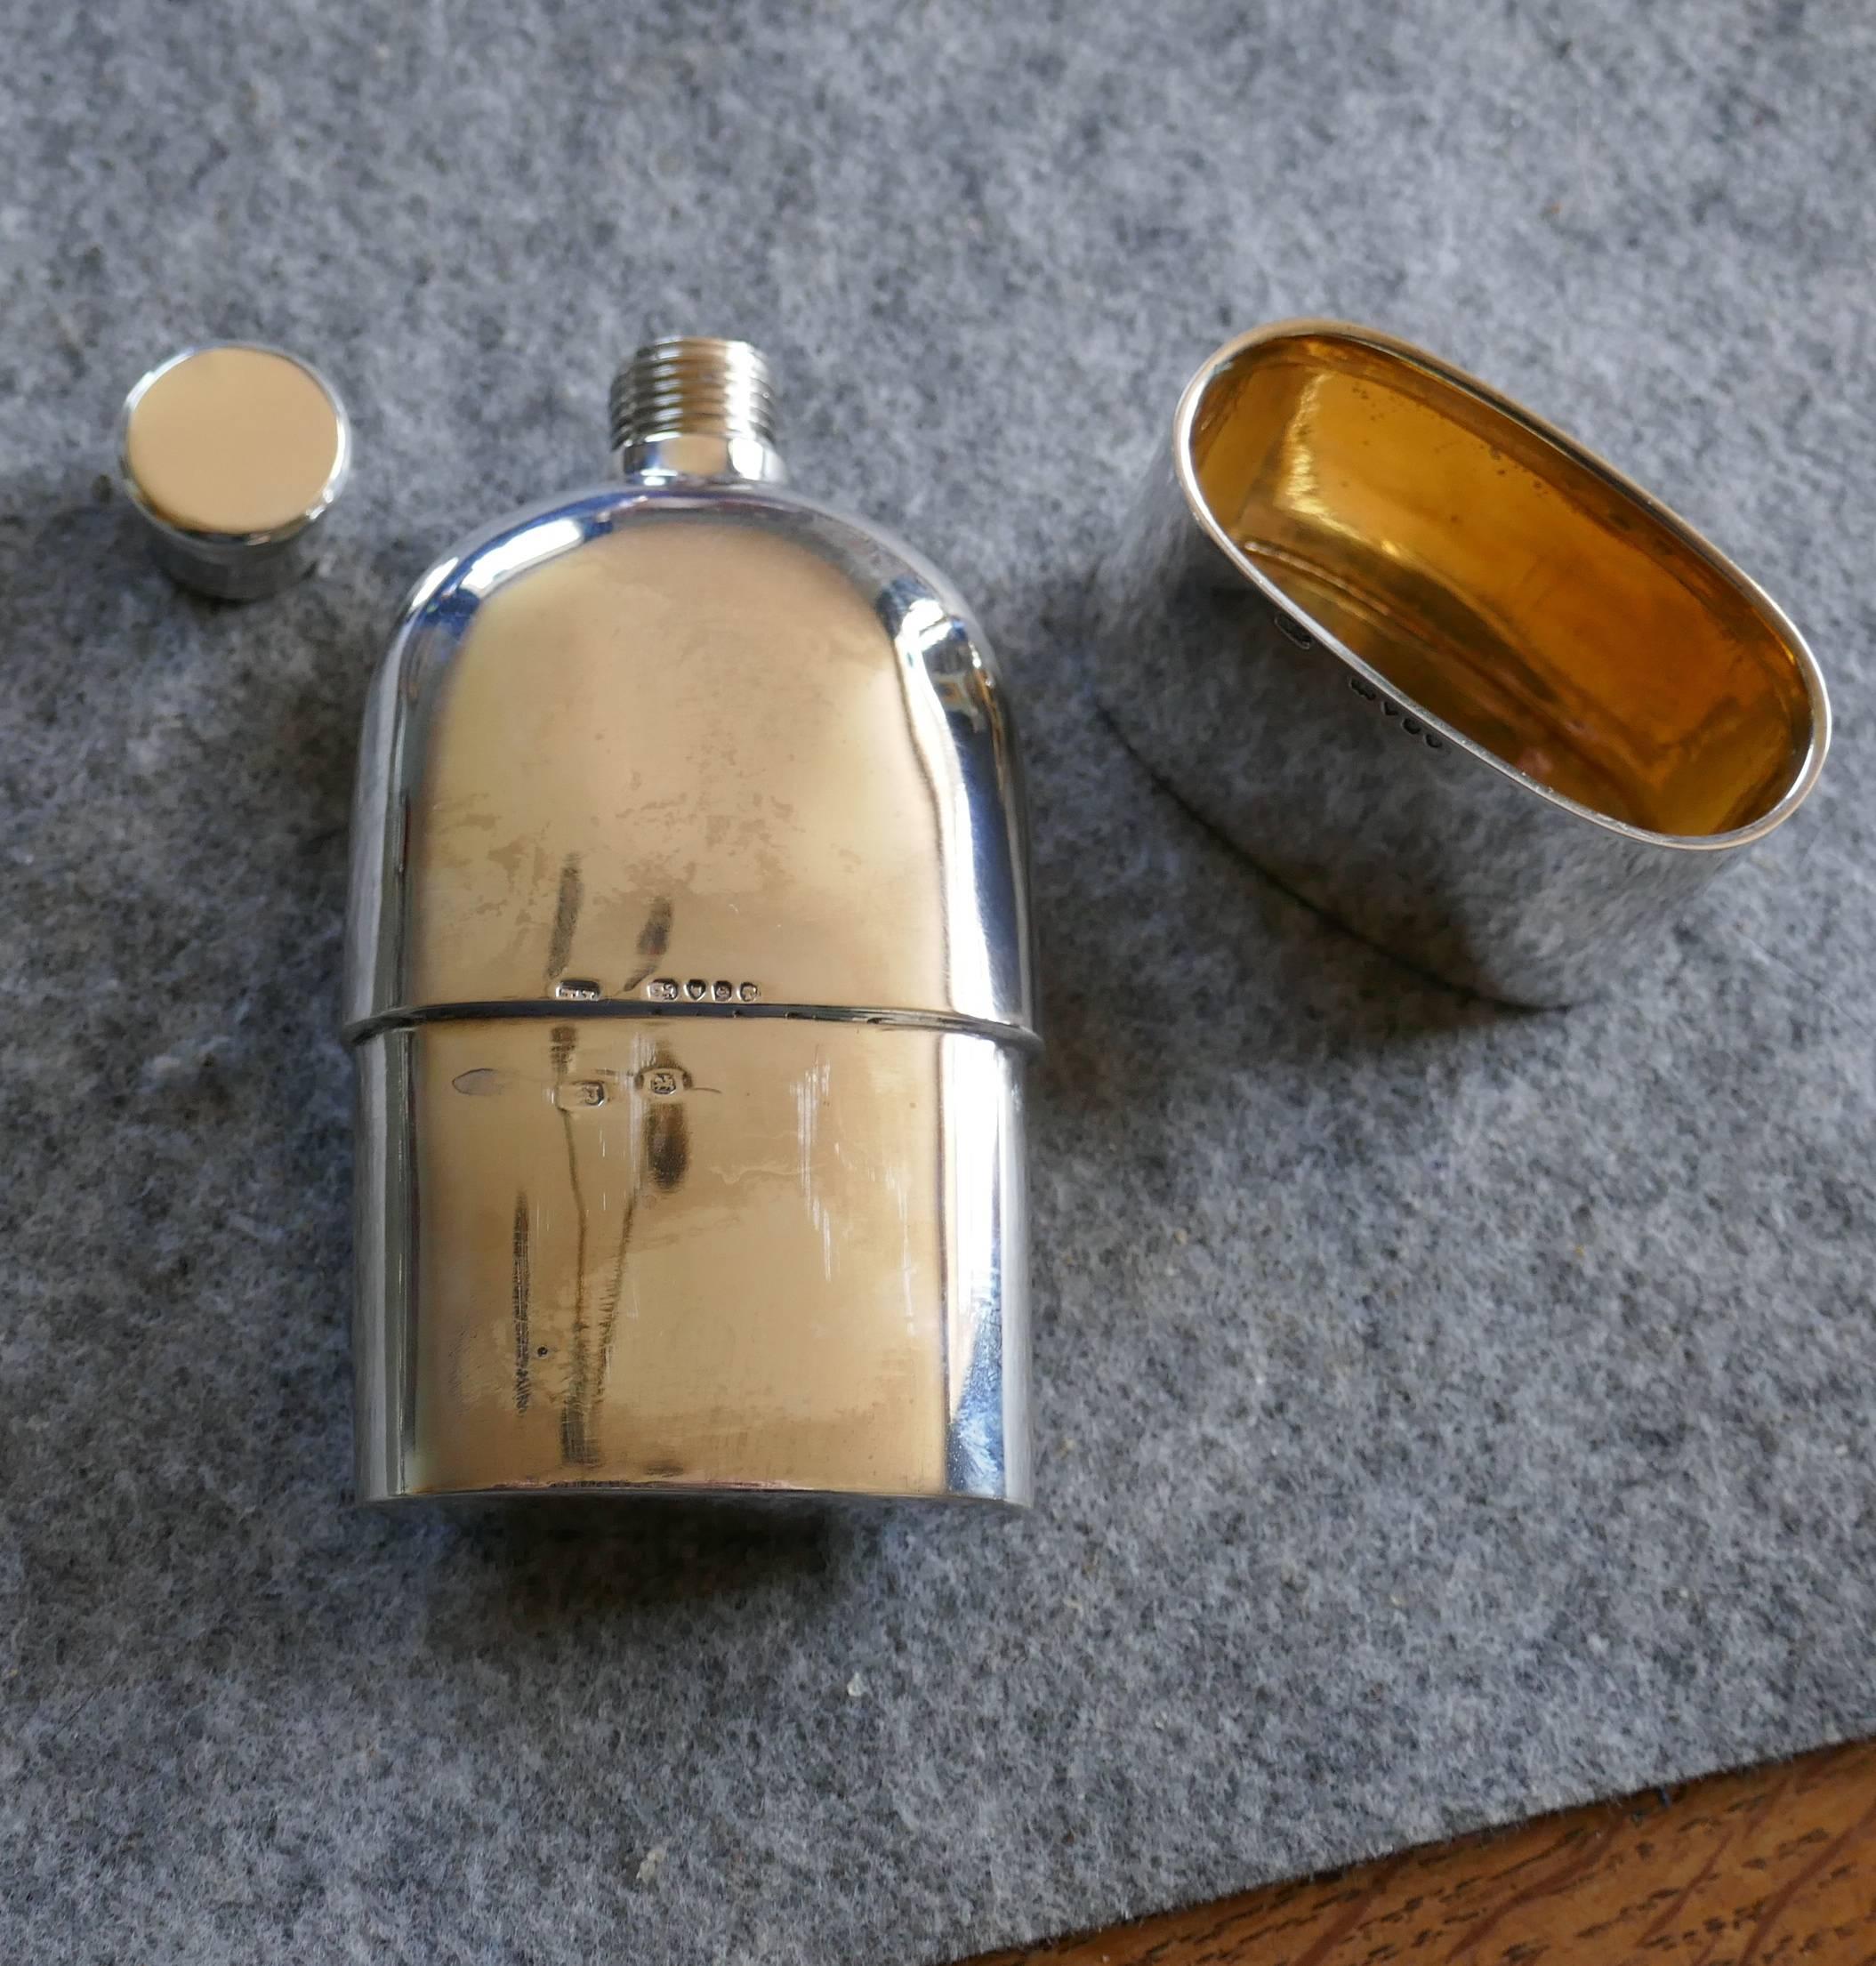 A solid silver hallmarked pocket or hip flask and cup date 1888

A lovely piece the flask has a rounded shape, making it ideal to keep in either a breast or hip pocket, or even handbag. The lid has a screw grip and a cup which pulls out from the